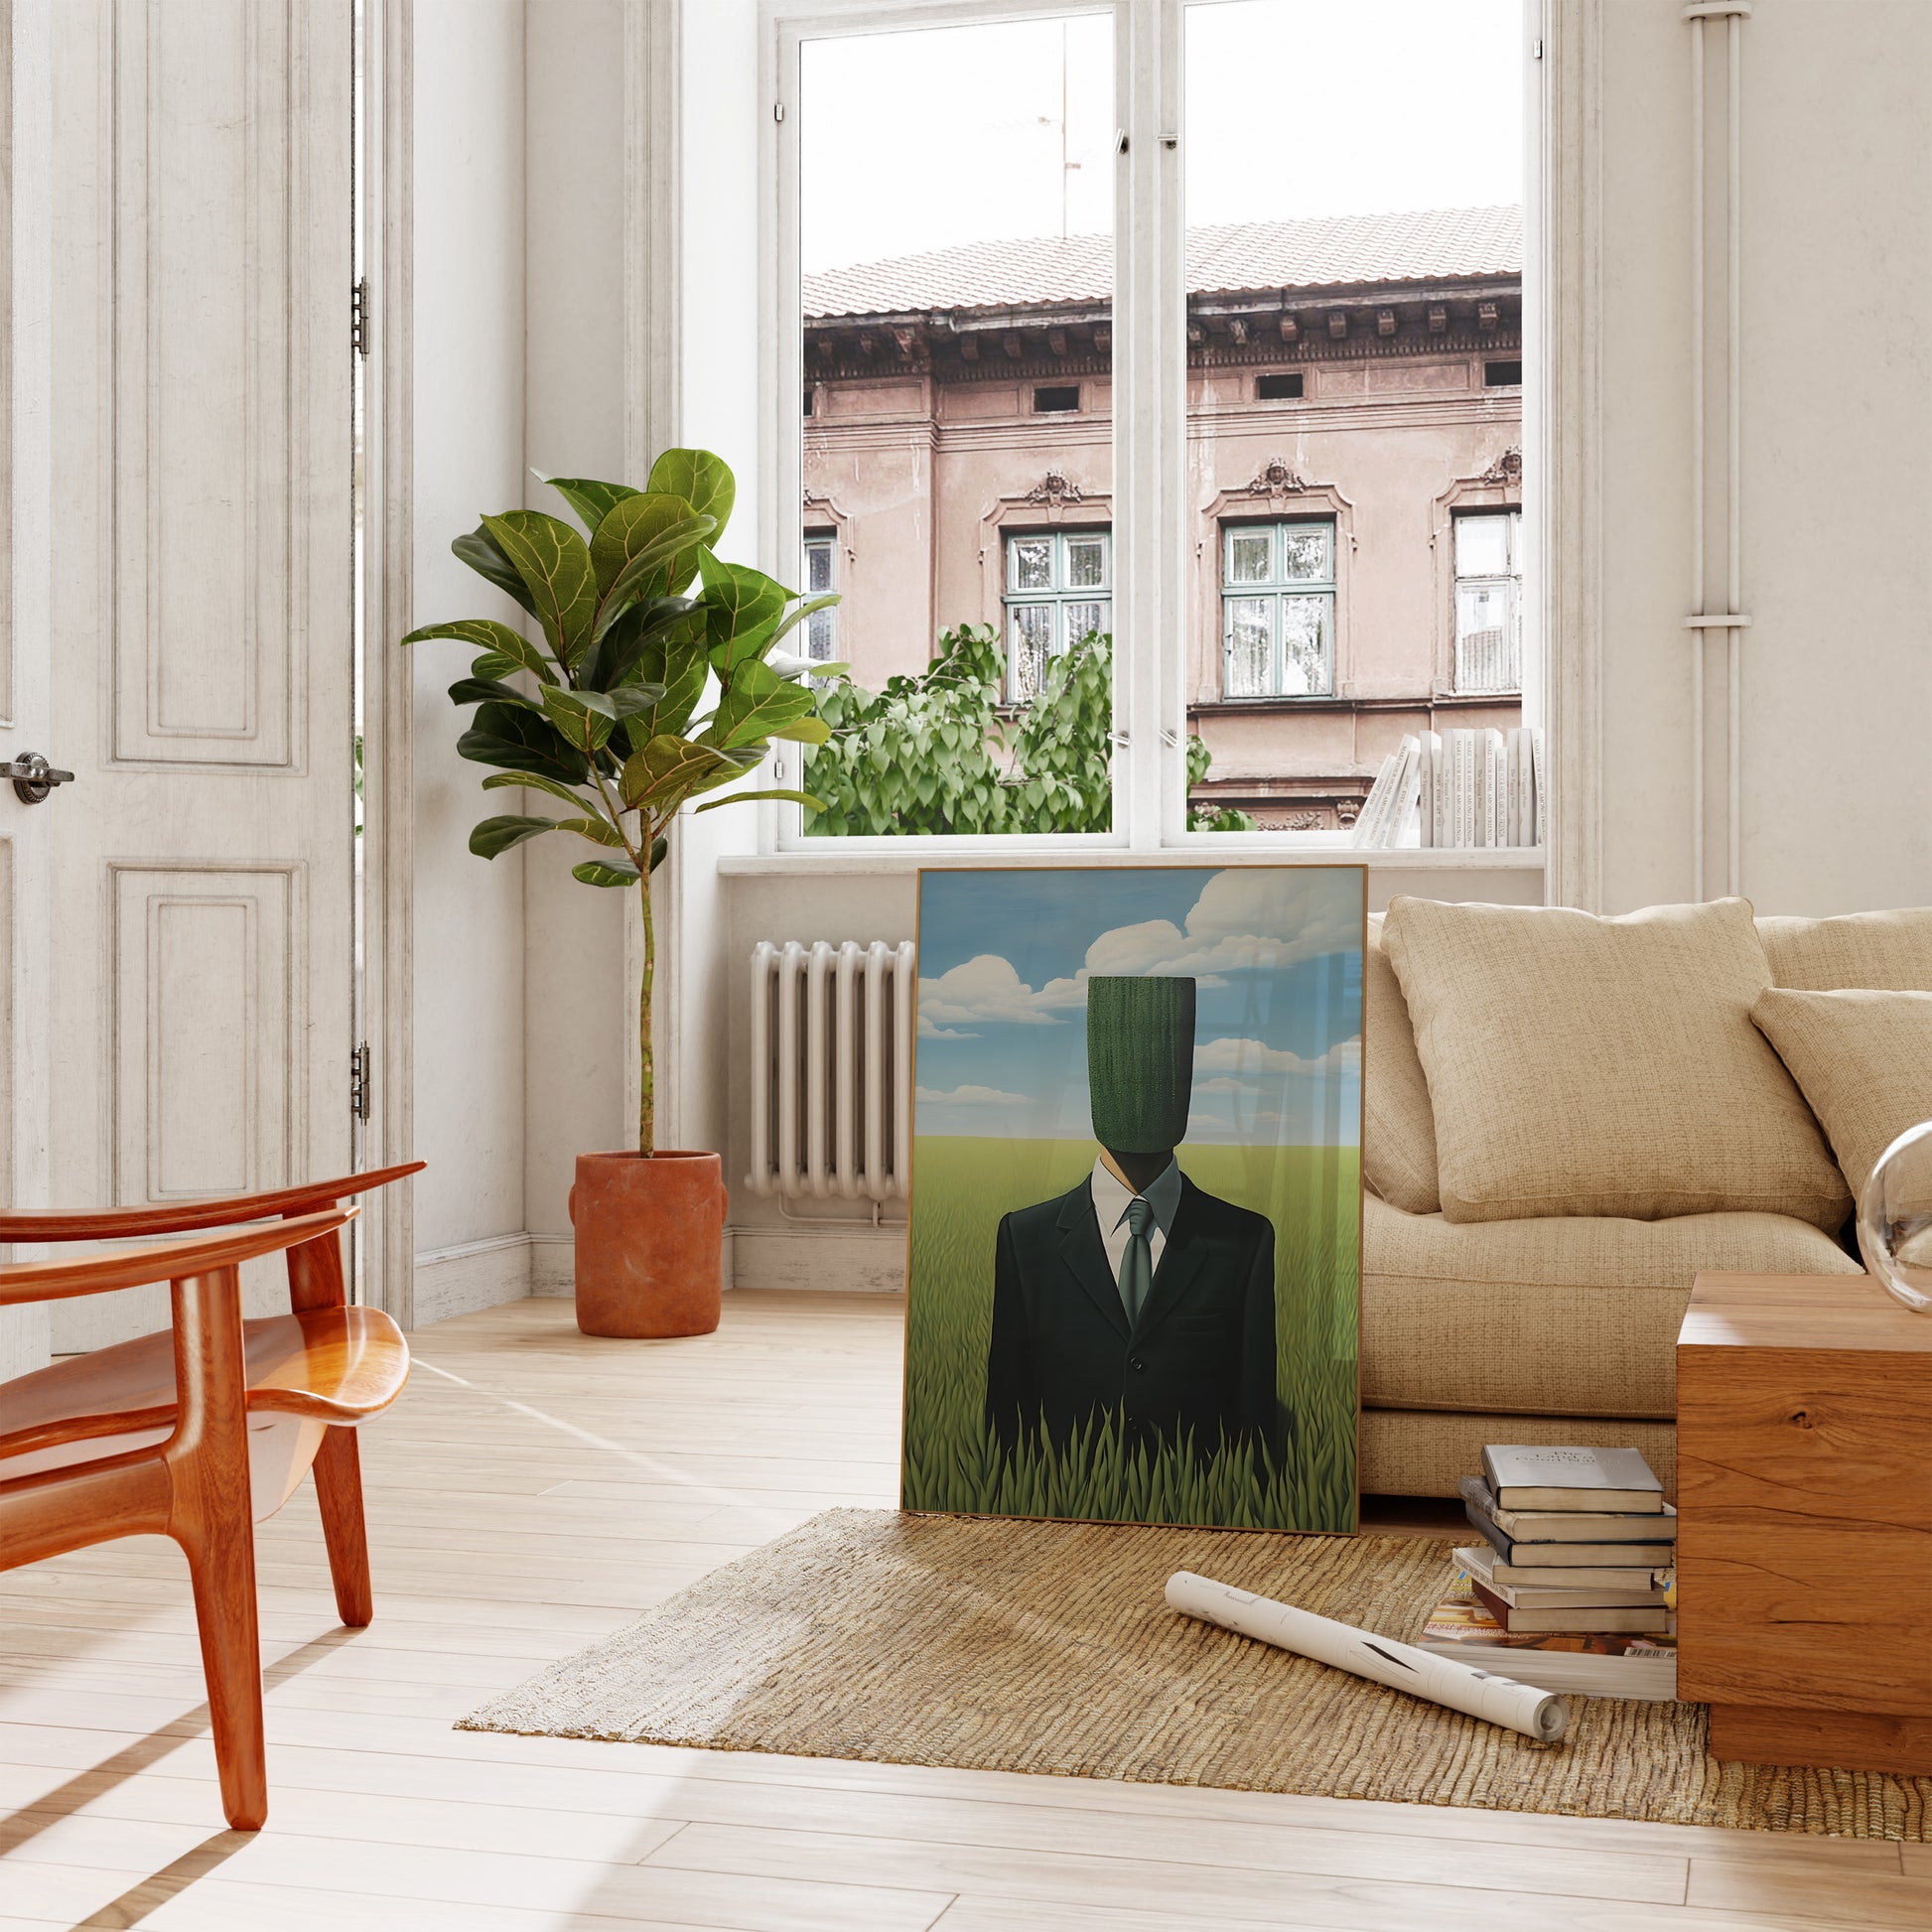 Modern living room with a sofa and an artwork of a man with a plant for a head.